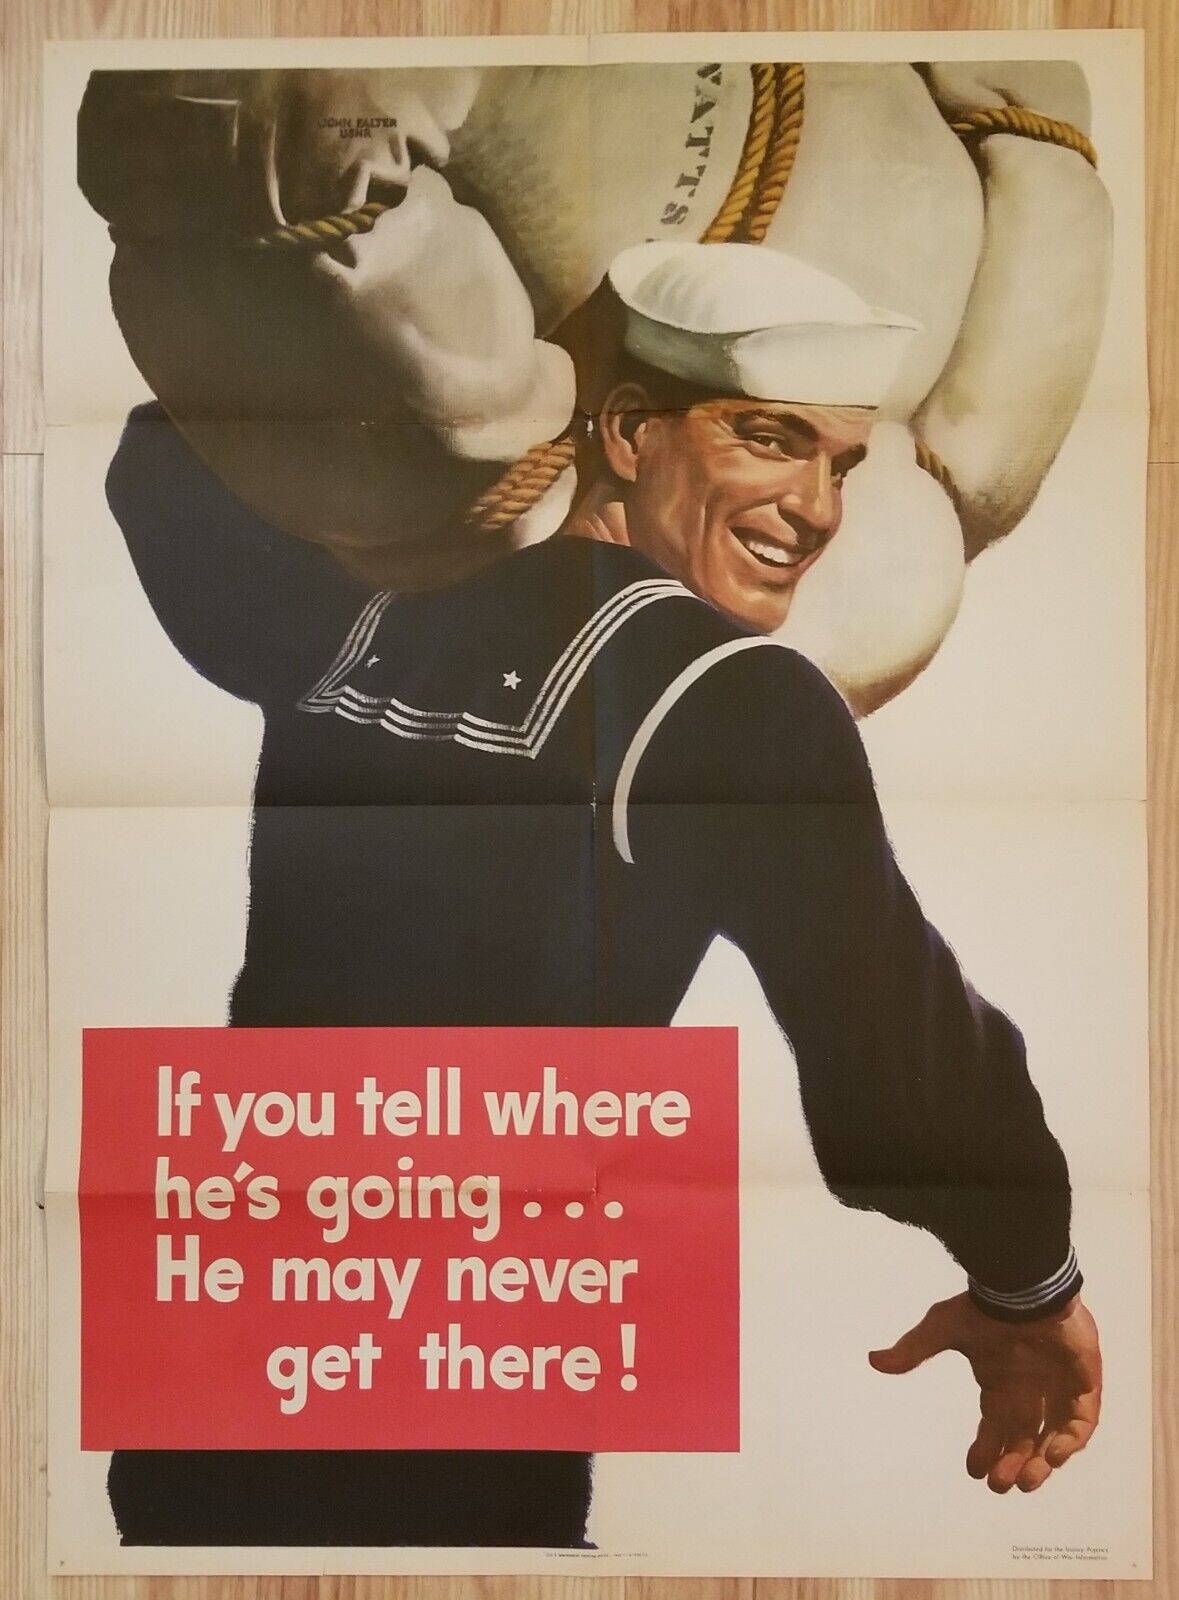 Original 1943 “If You Tell Where He’s Going He May Never Get There” WWII Poster